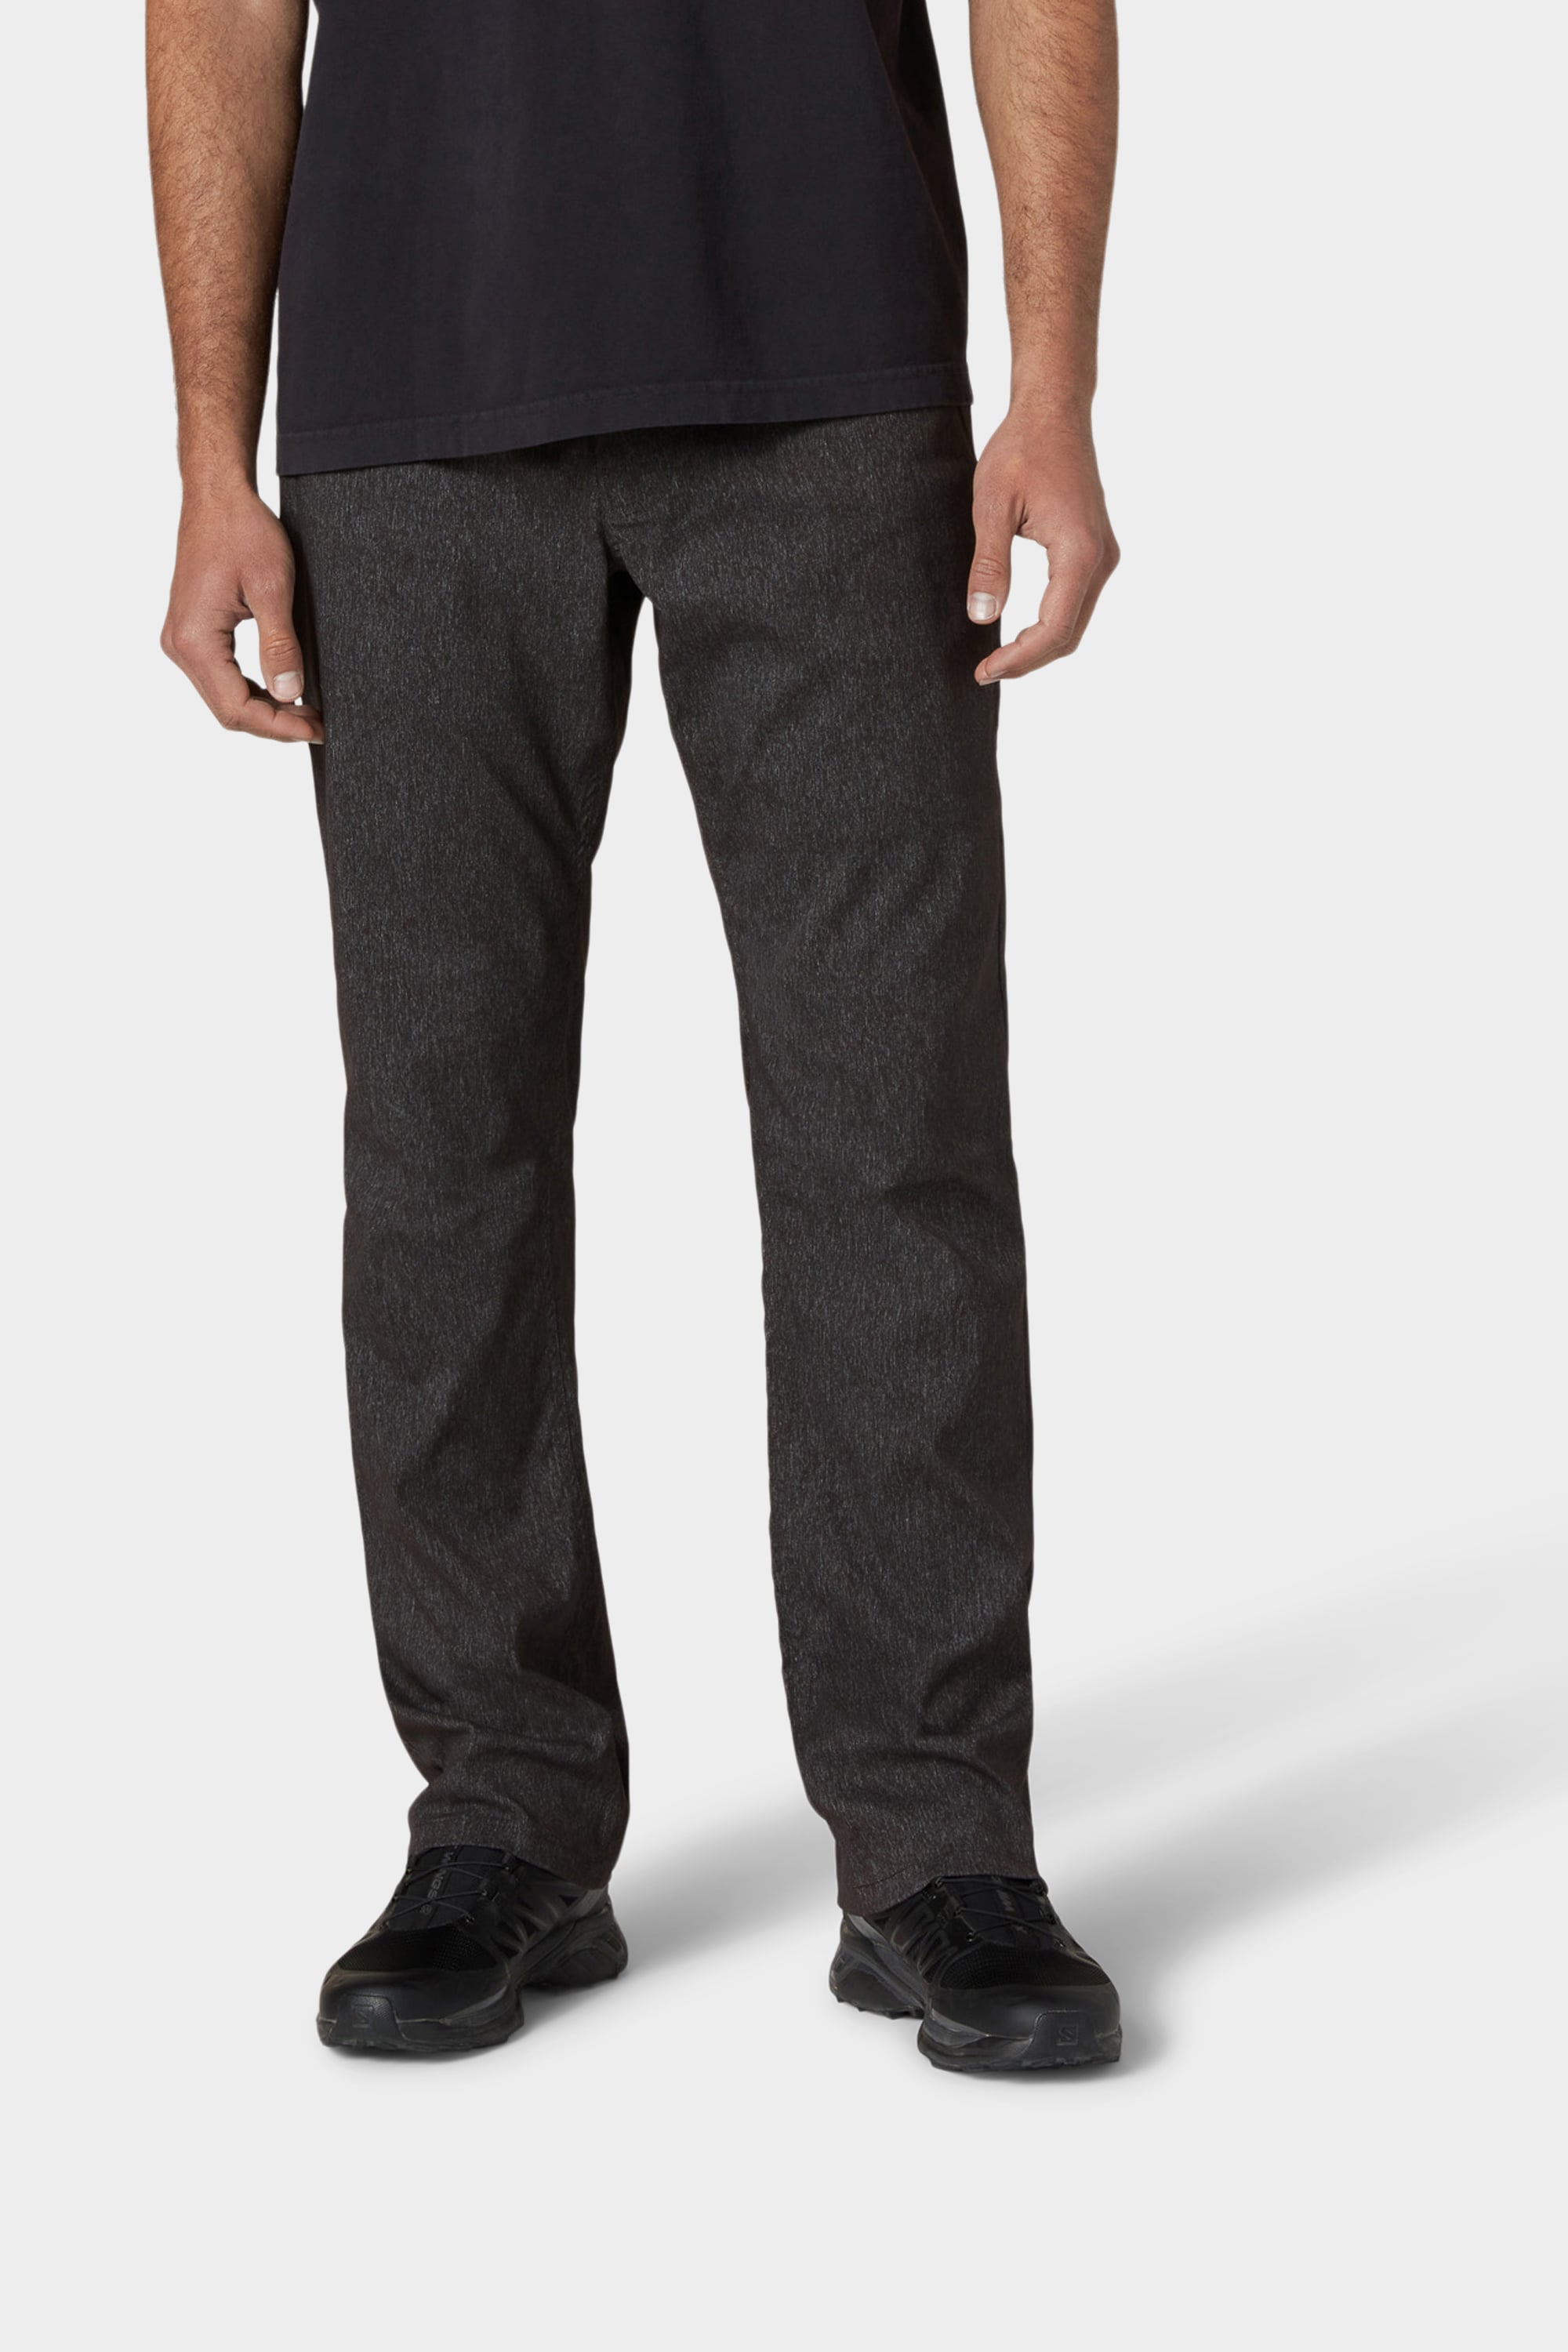 686 Men's Everywhere Pant - Relaxed Fit – 686.com